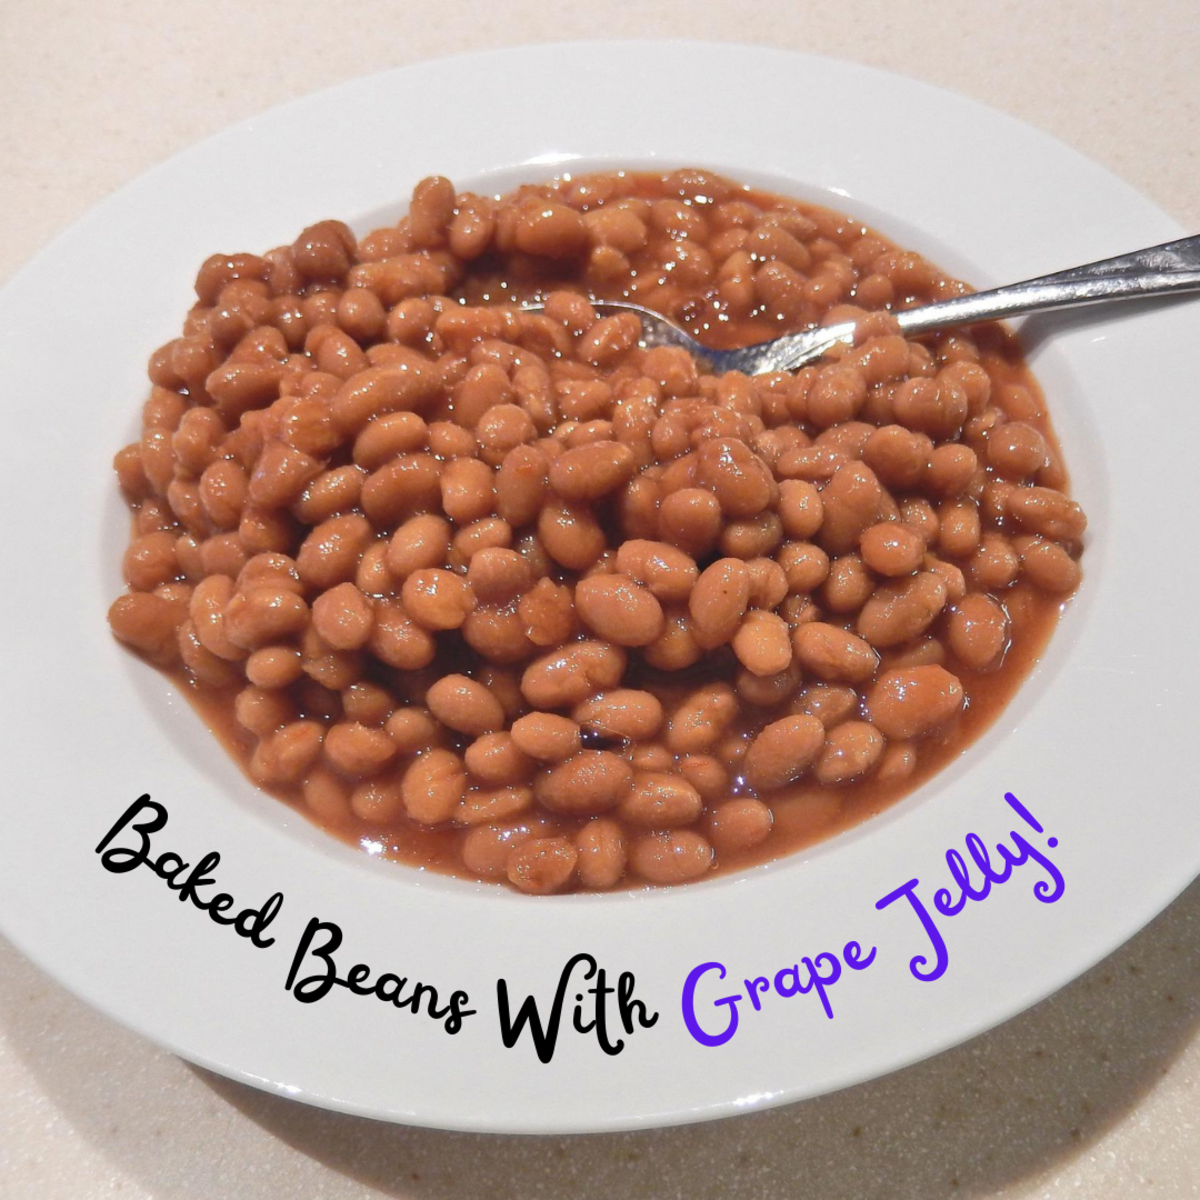 It might sound a tad strange, but baked beans with grape jelly really works!